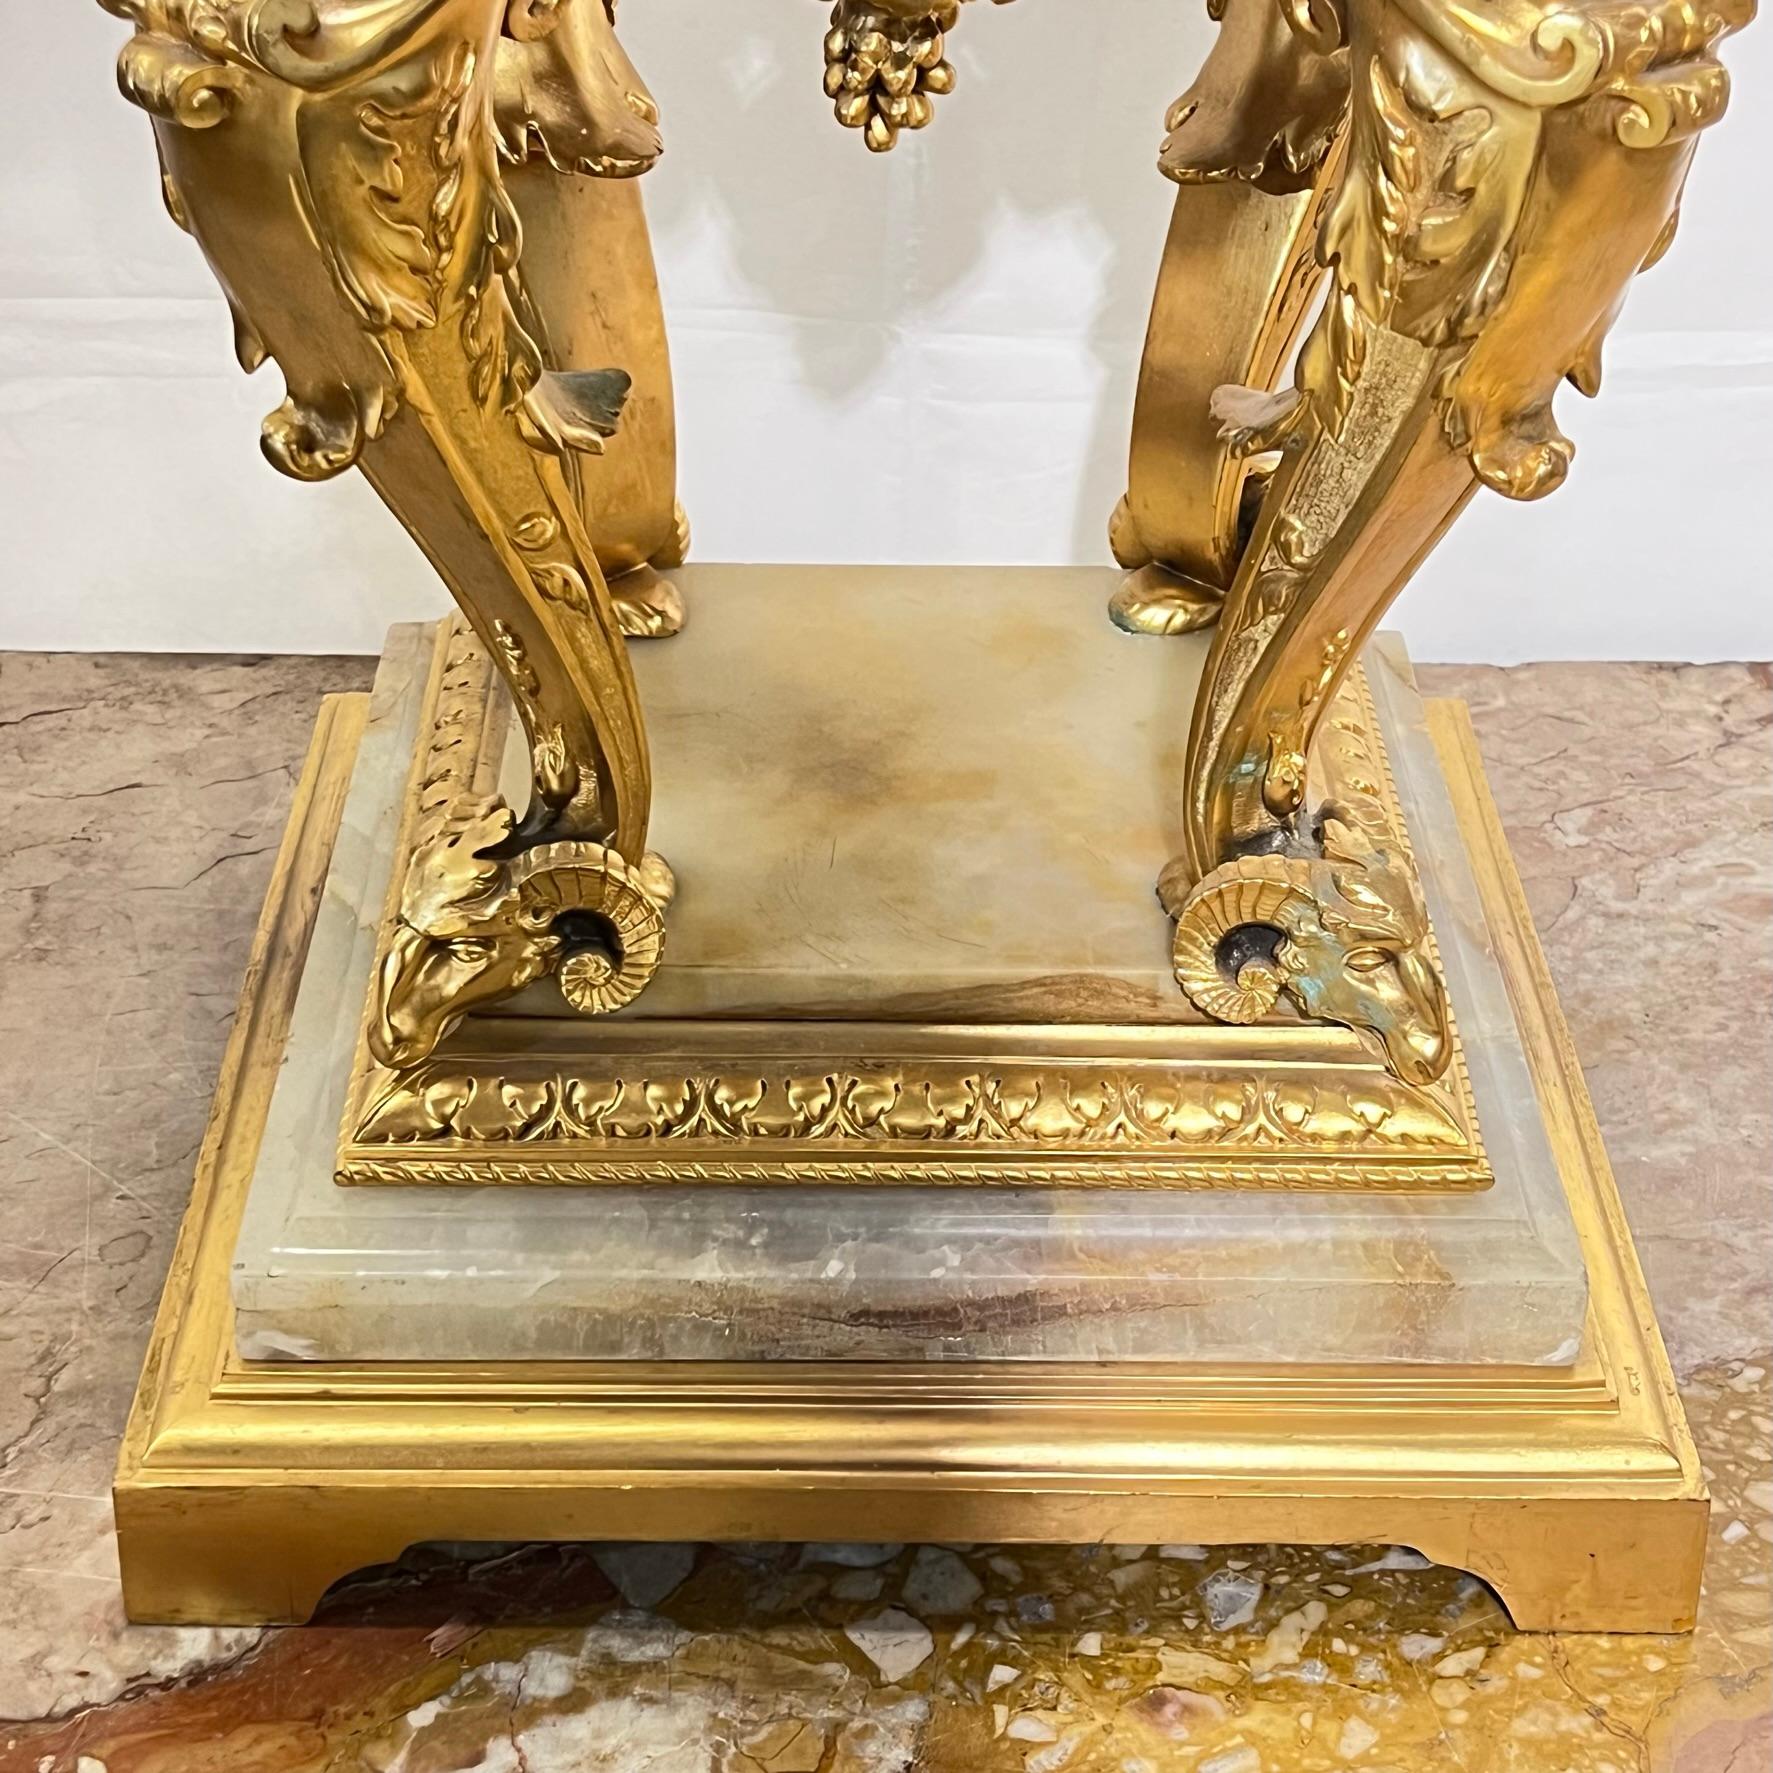 Monumental 19th Century French Neoclassical Onyx and Gilt Bronze Vase For Sale 10